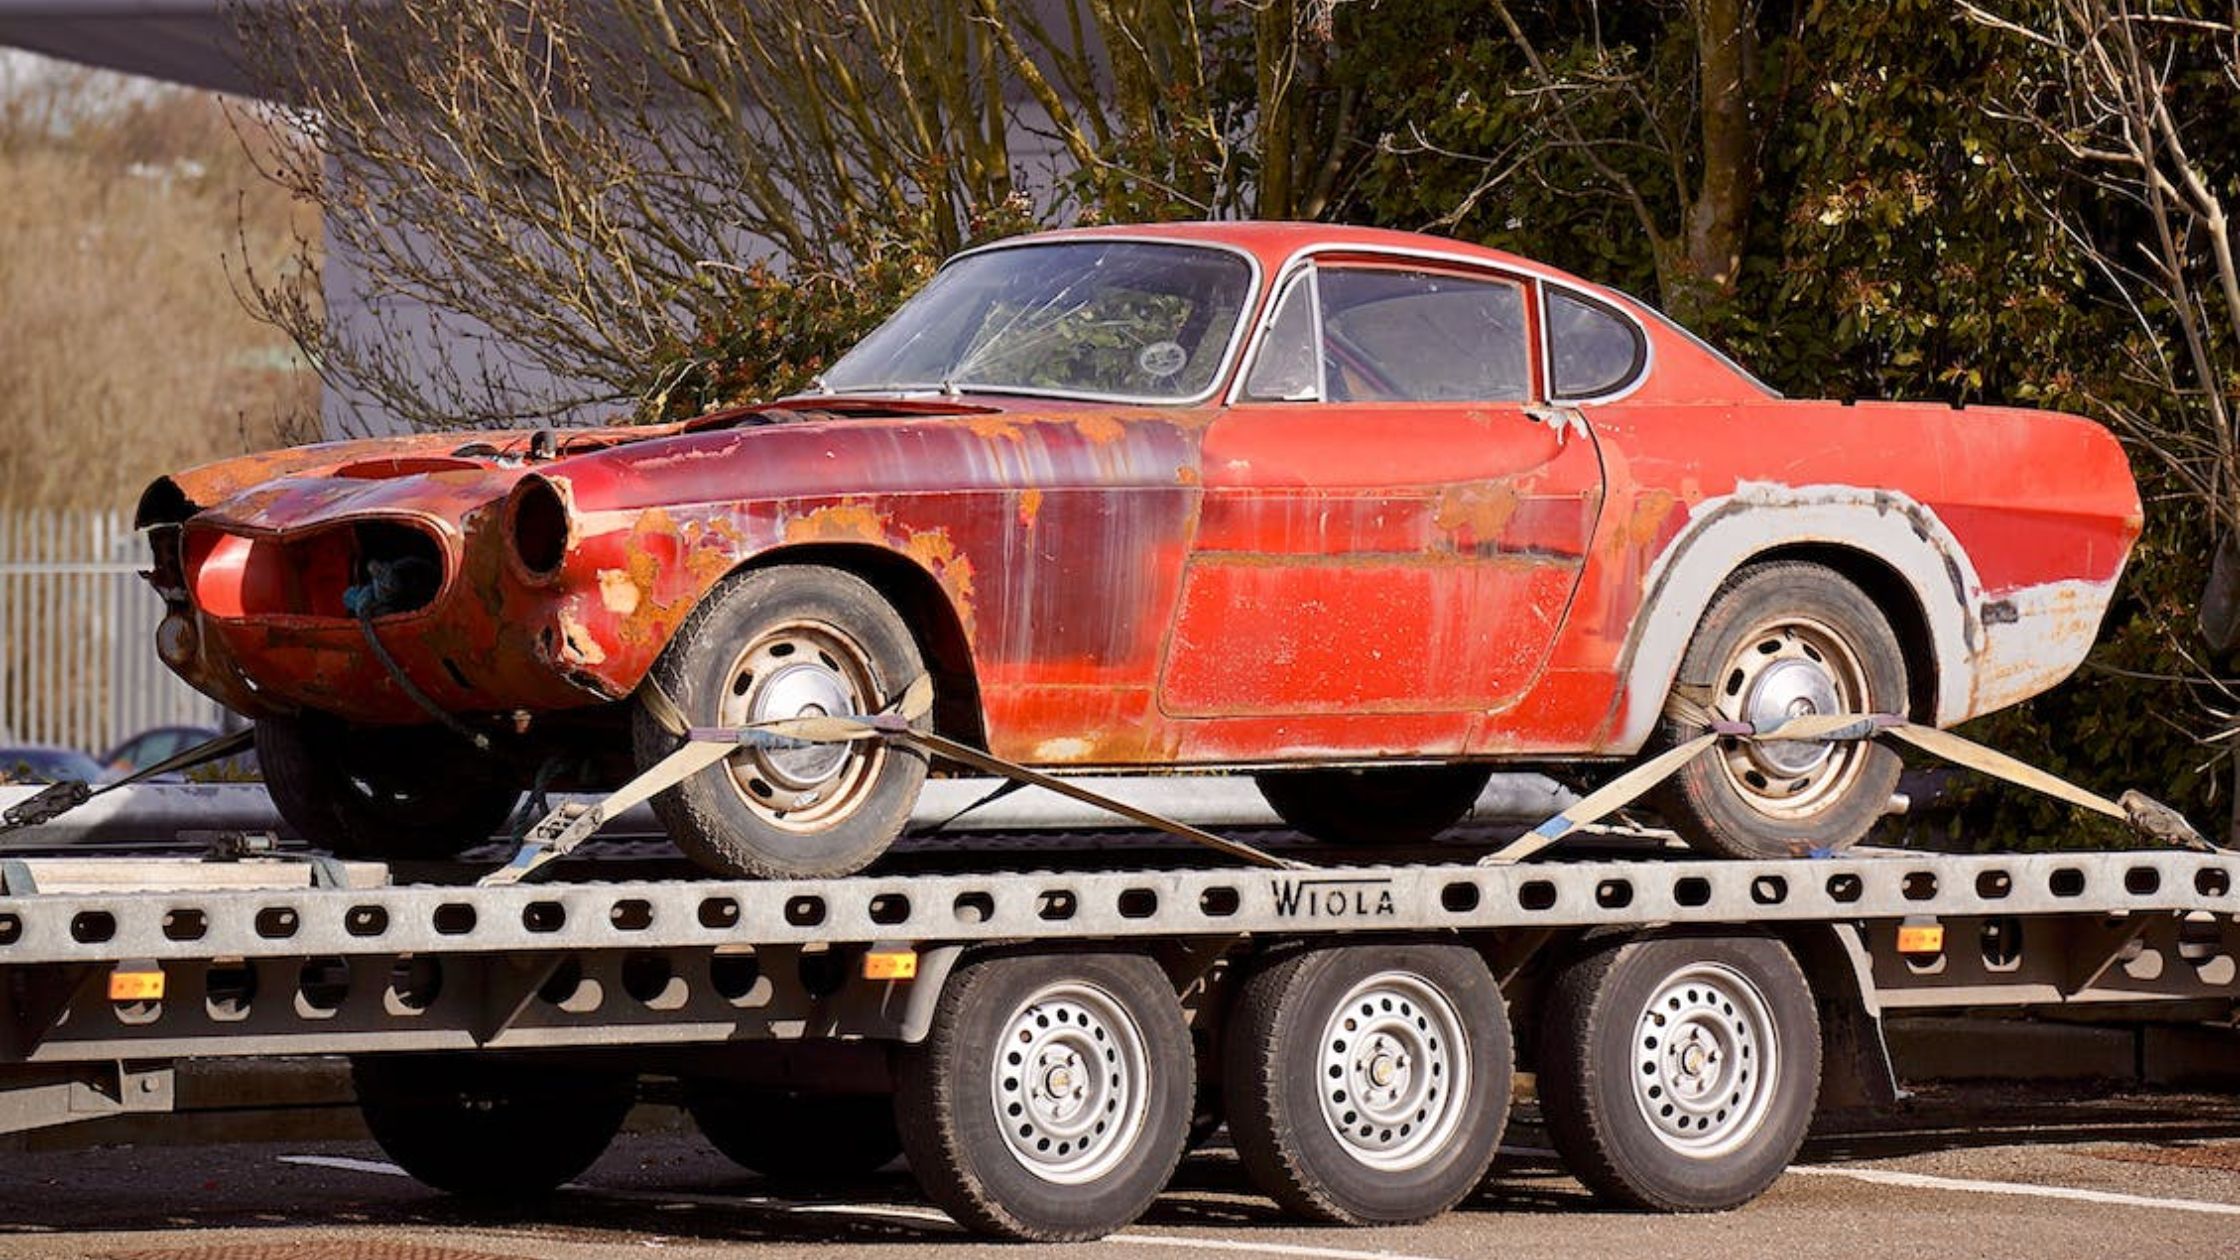 Common Reasons You Might Need an Auto Towing Service